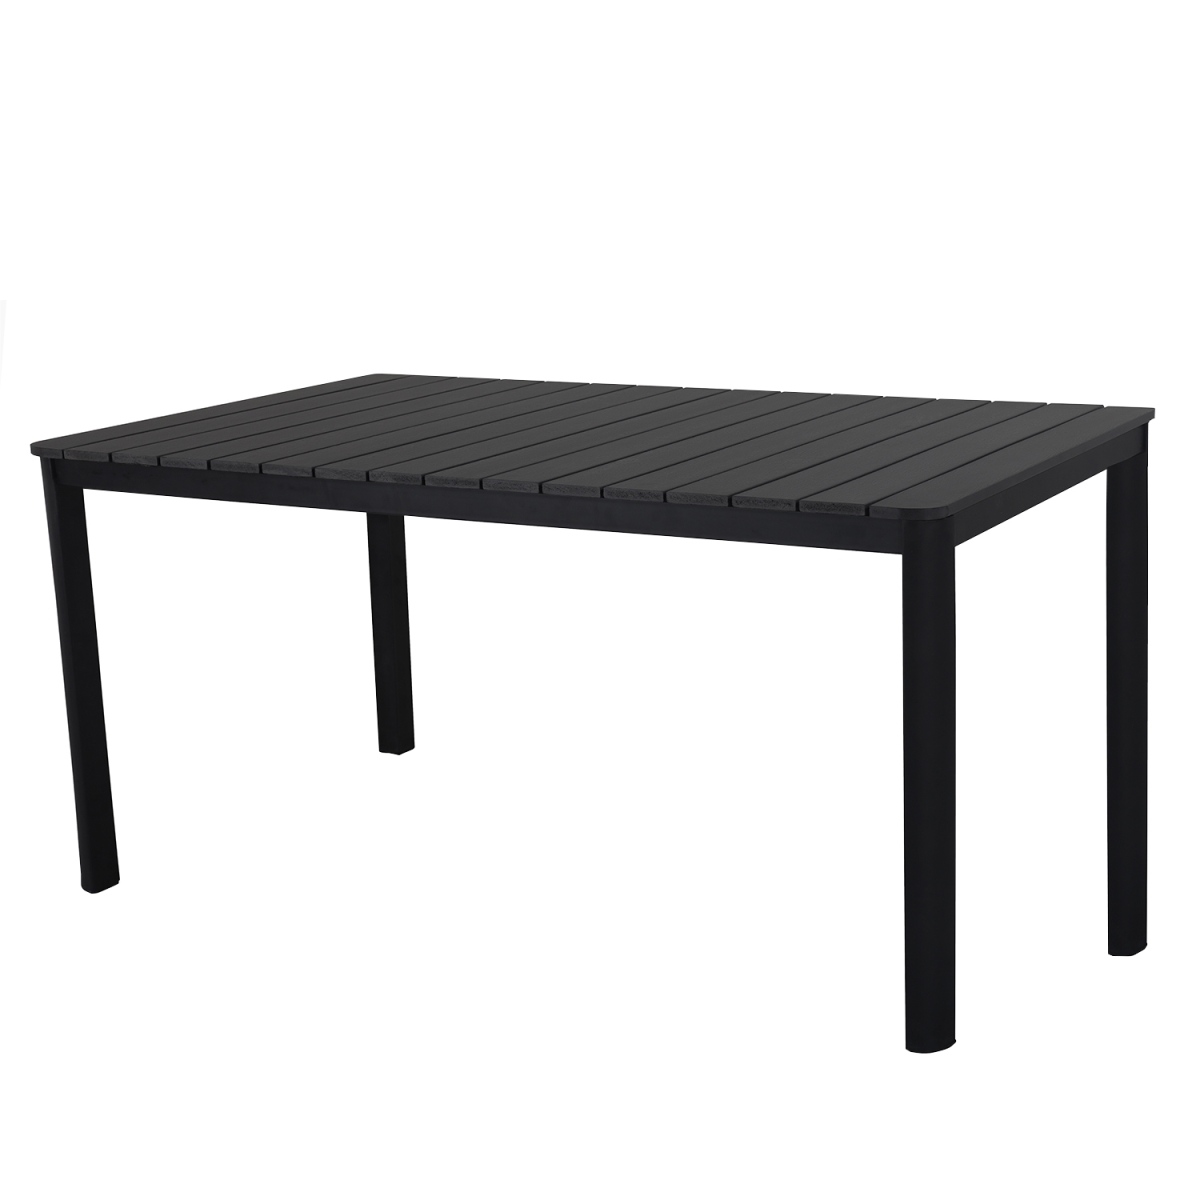 Oakland Living 932-table-bk 63 In. Indoor & Outdoor Rectangular Modern Contemporary Faux Wood Slatted Steel Dining Table, Black